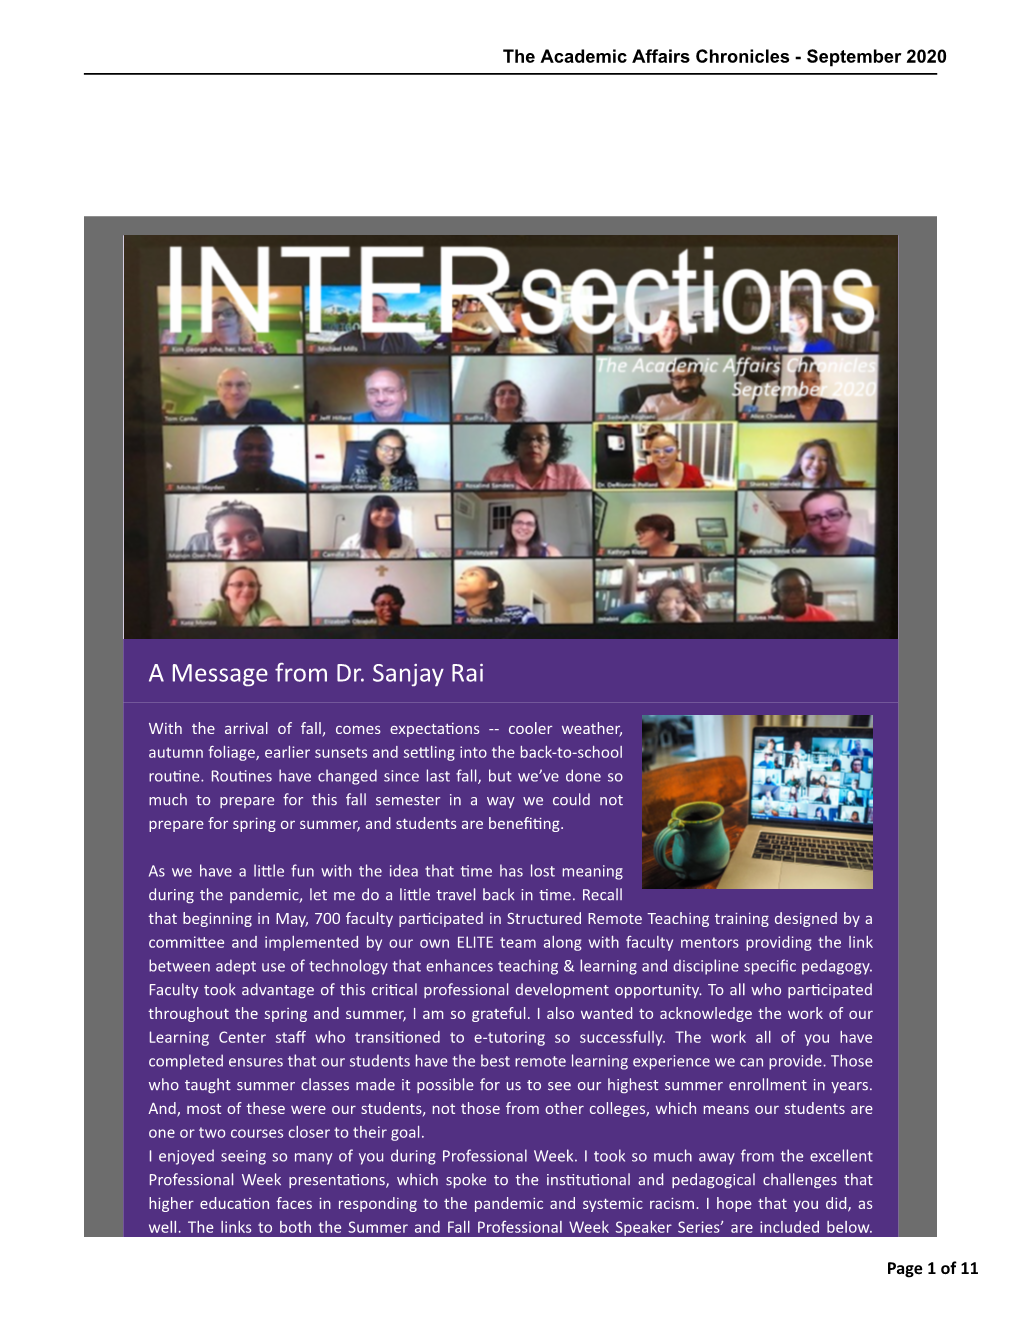 Montgomery College Academic Affairs, Intersections